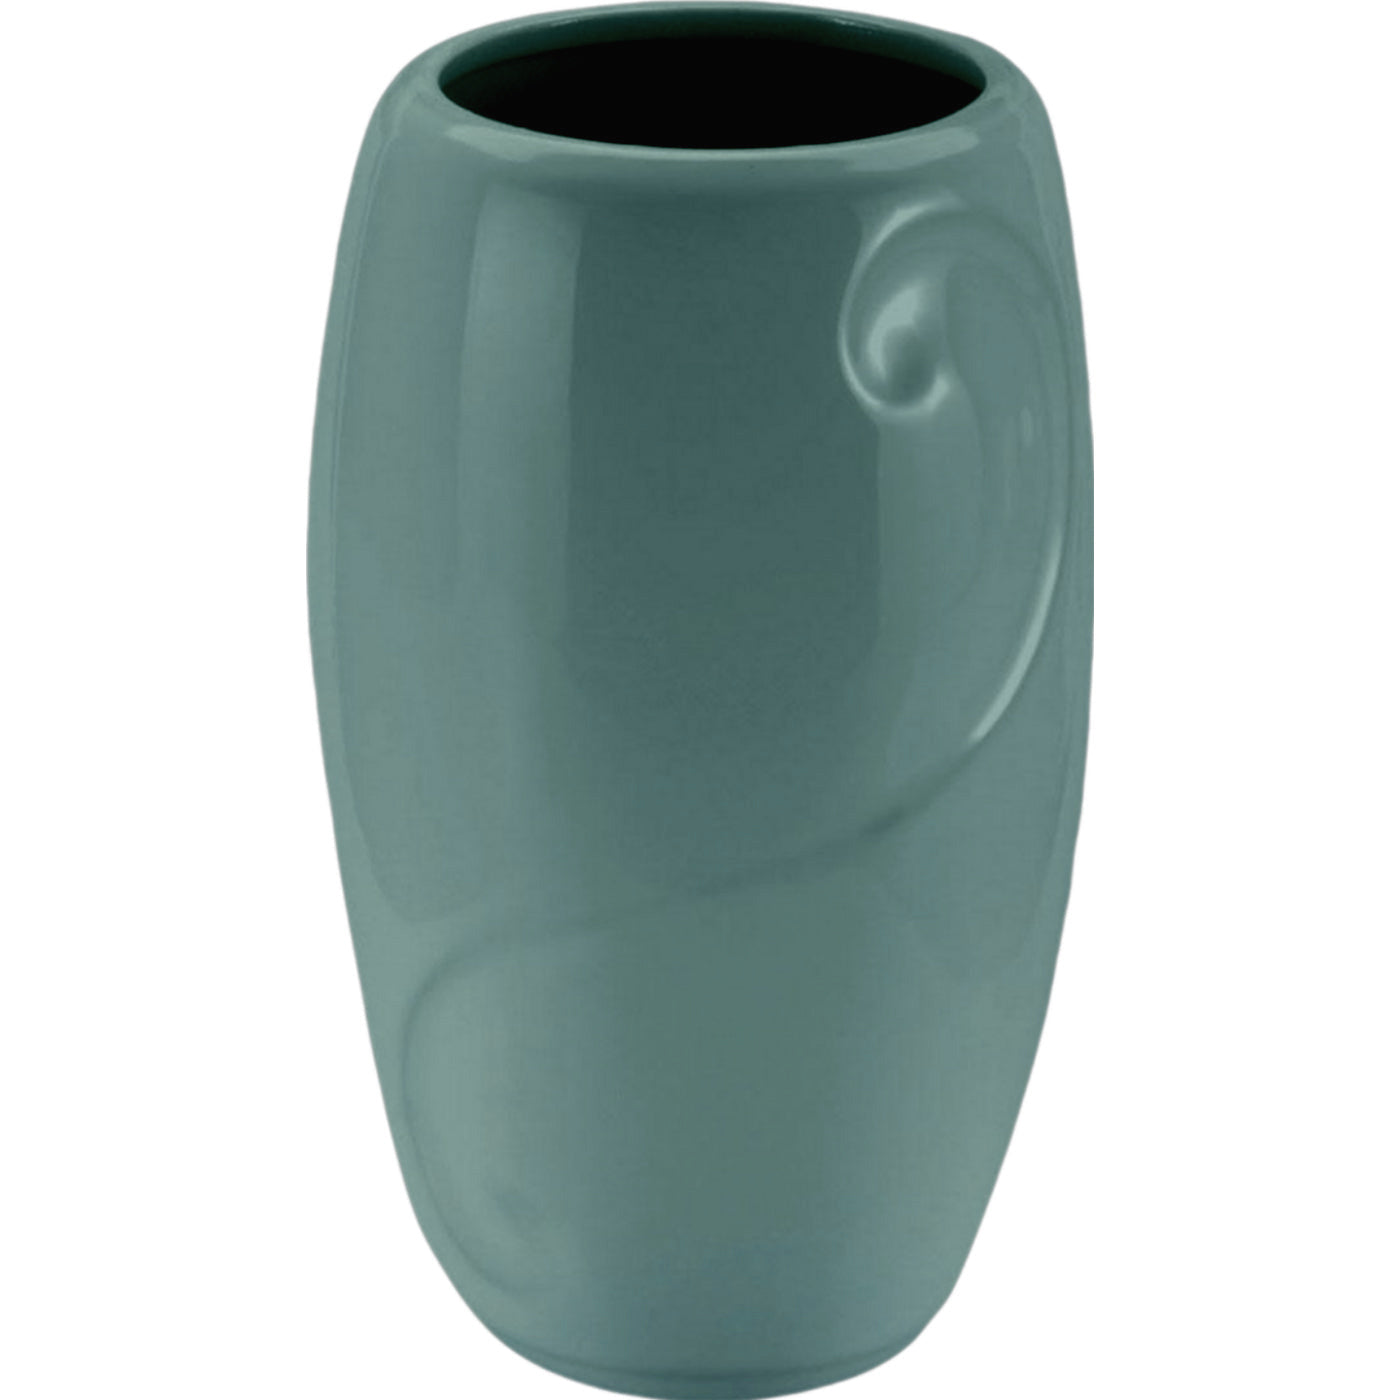 Grave vase Sharon green 21x13cm - 8.3x5.1in In green porcelain, ground attached SH124T/V